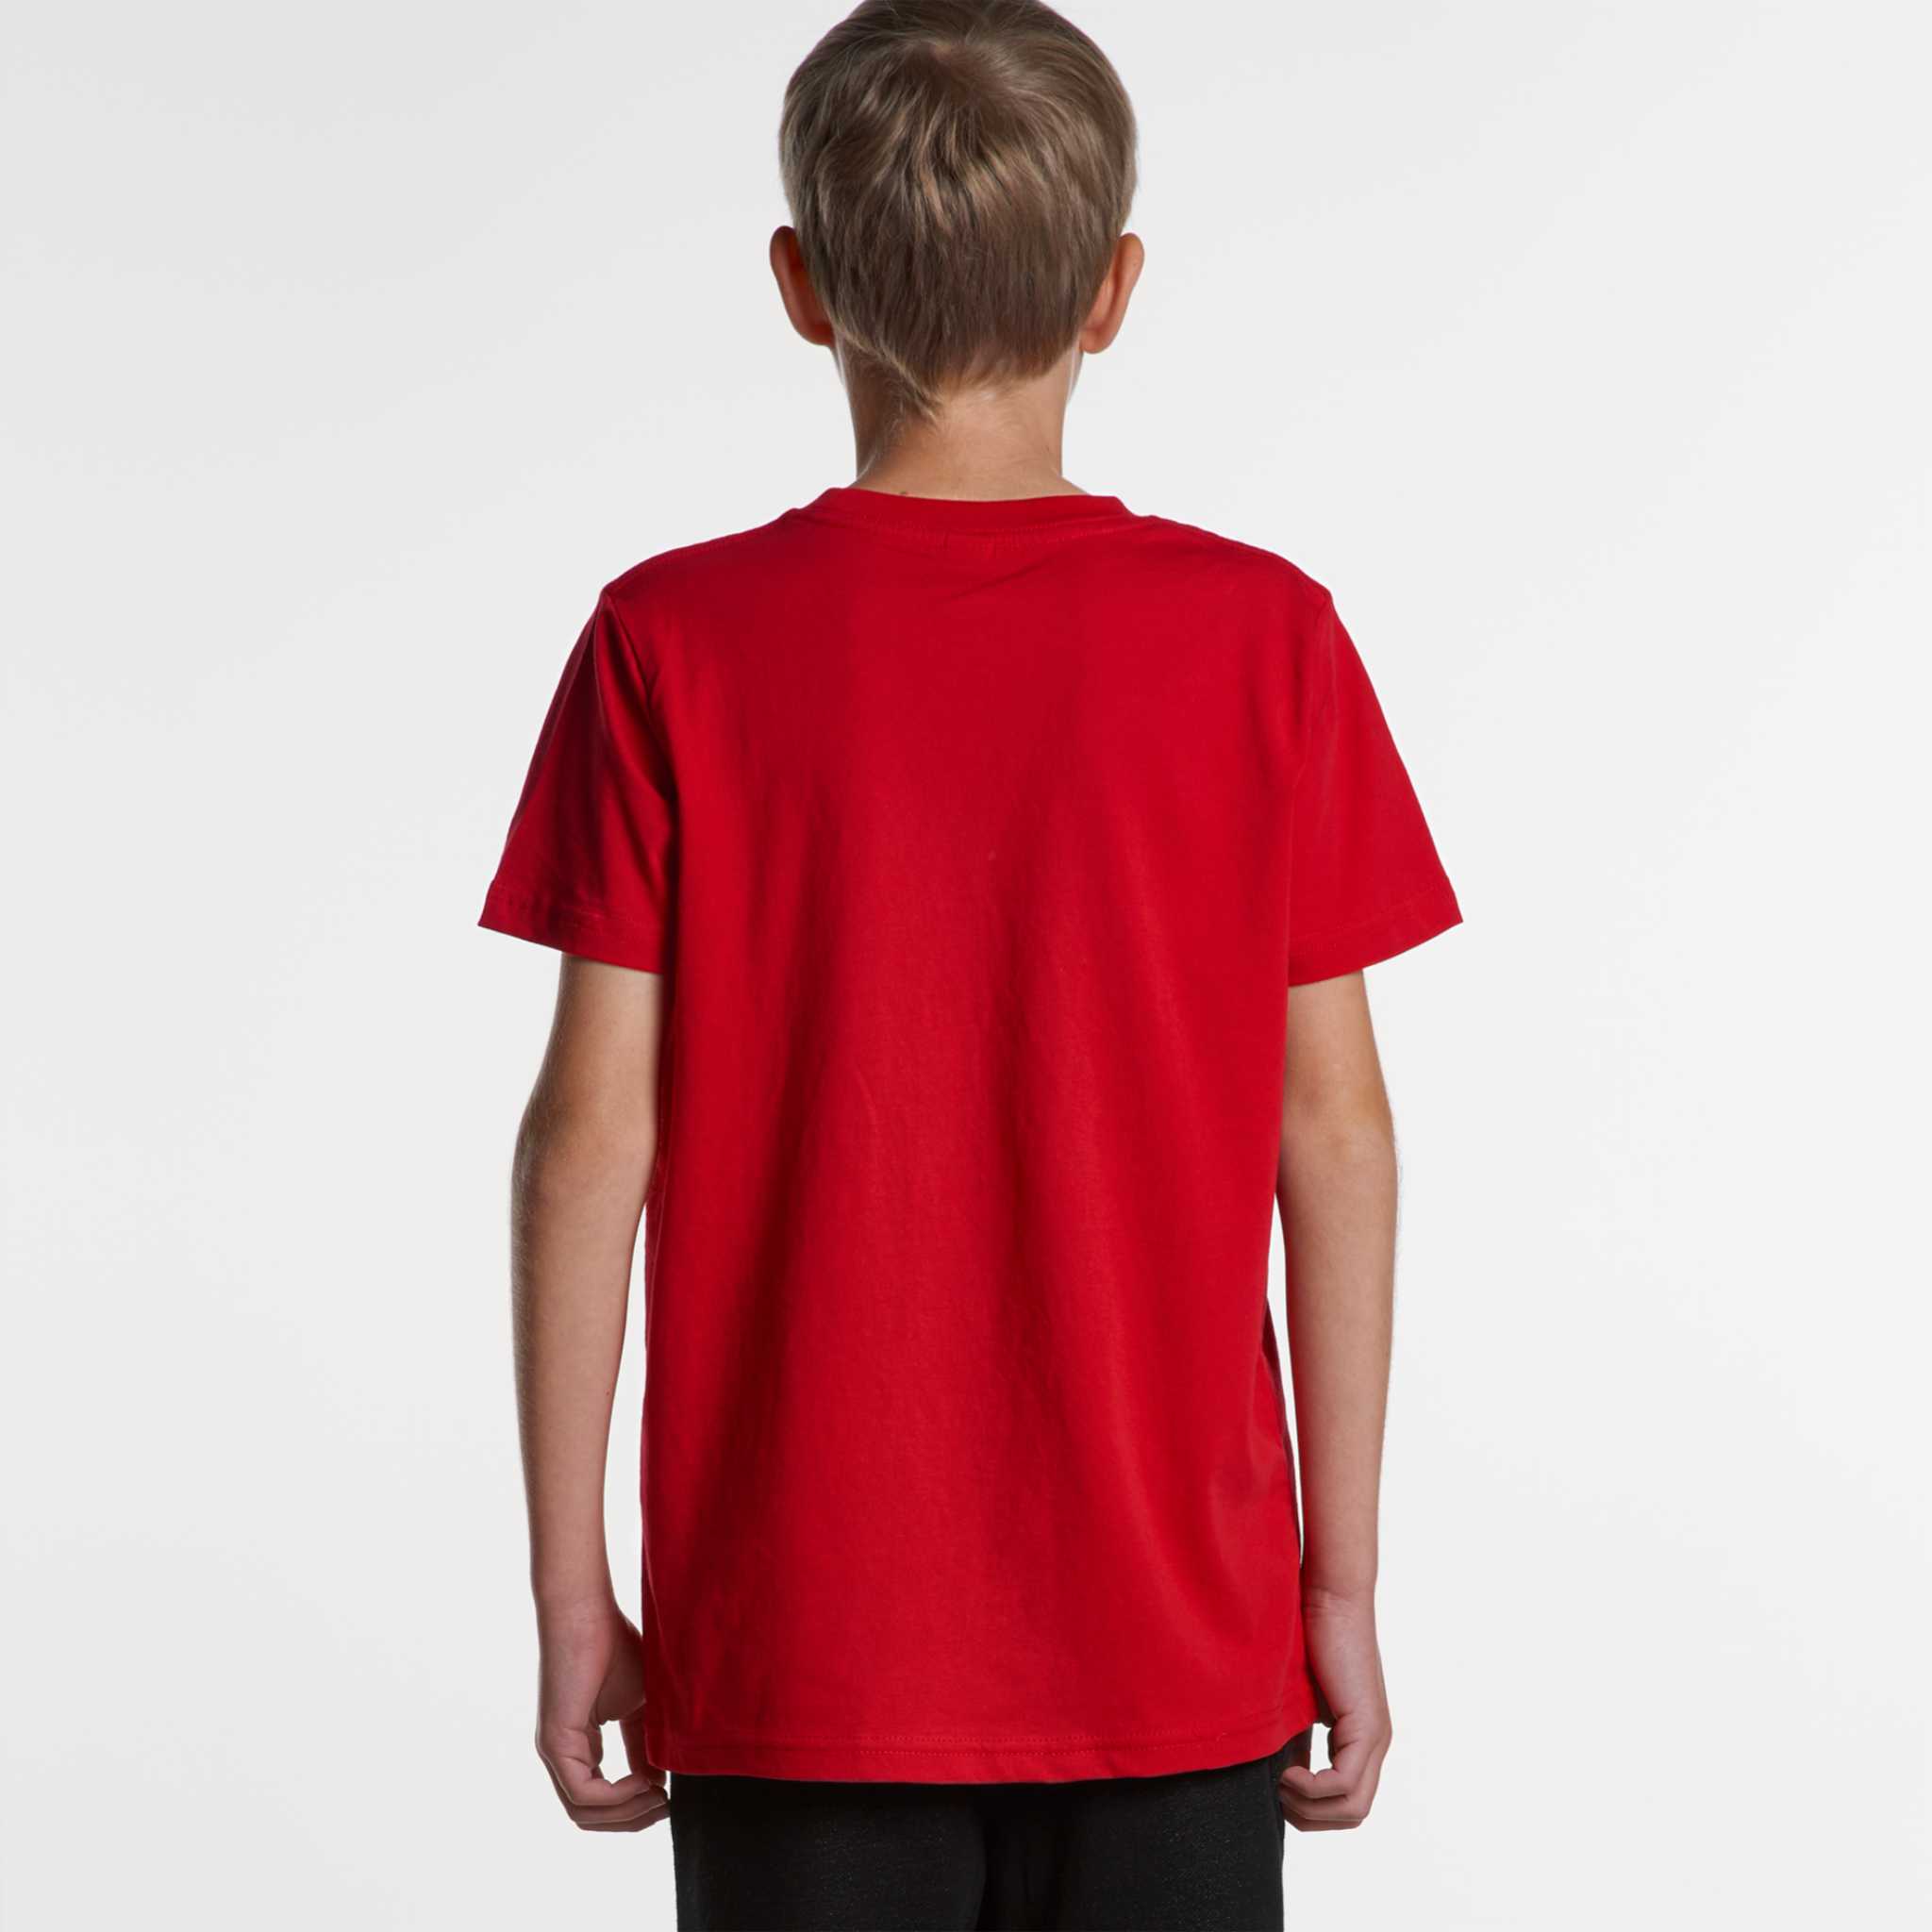 YOUTH T SHIRT